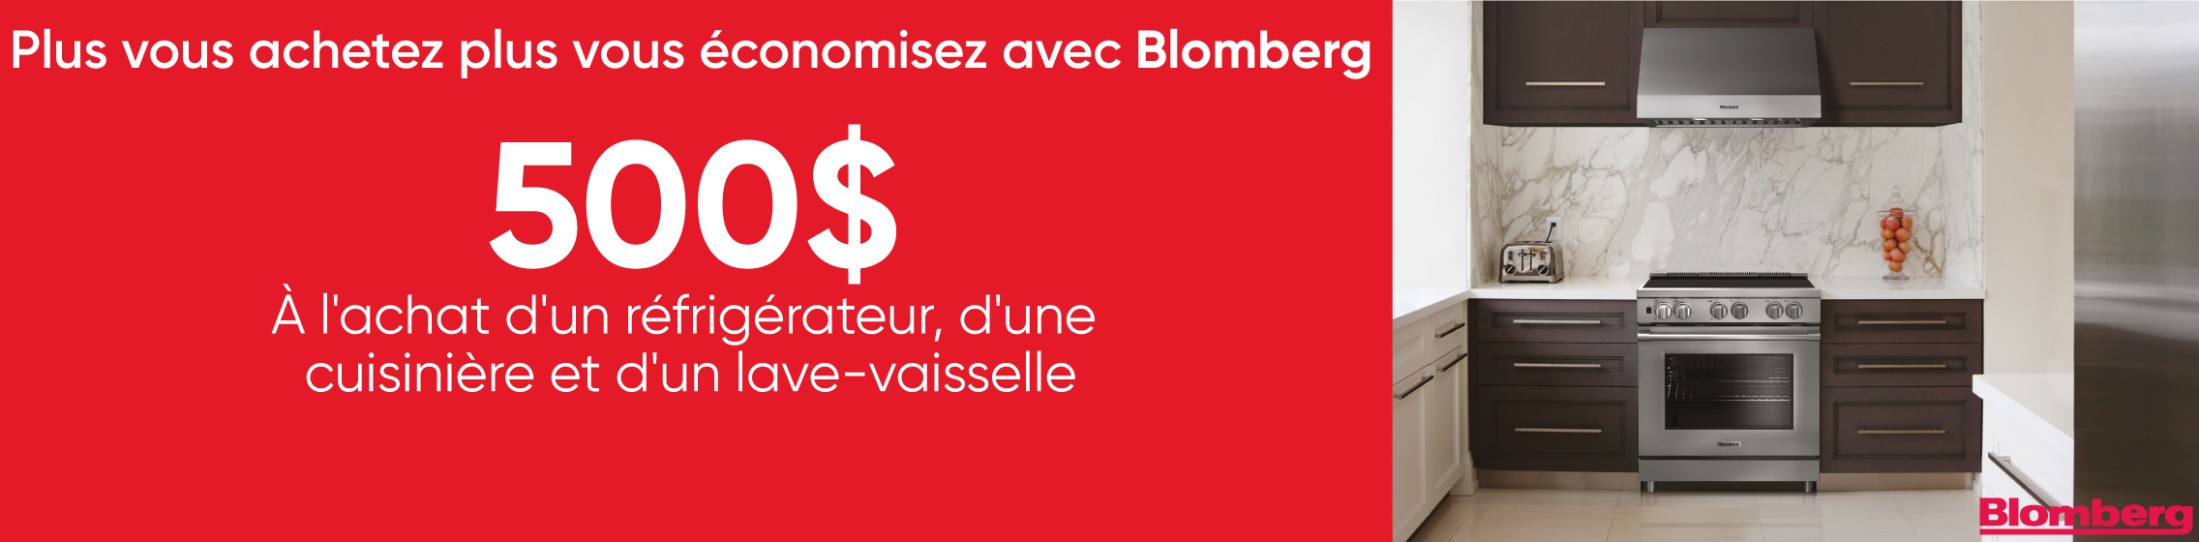 Promotions Blomberg